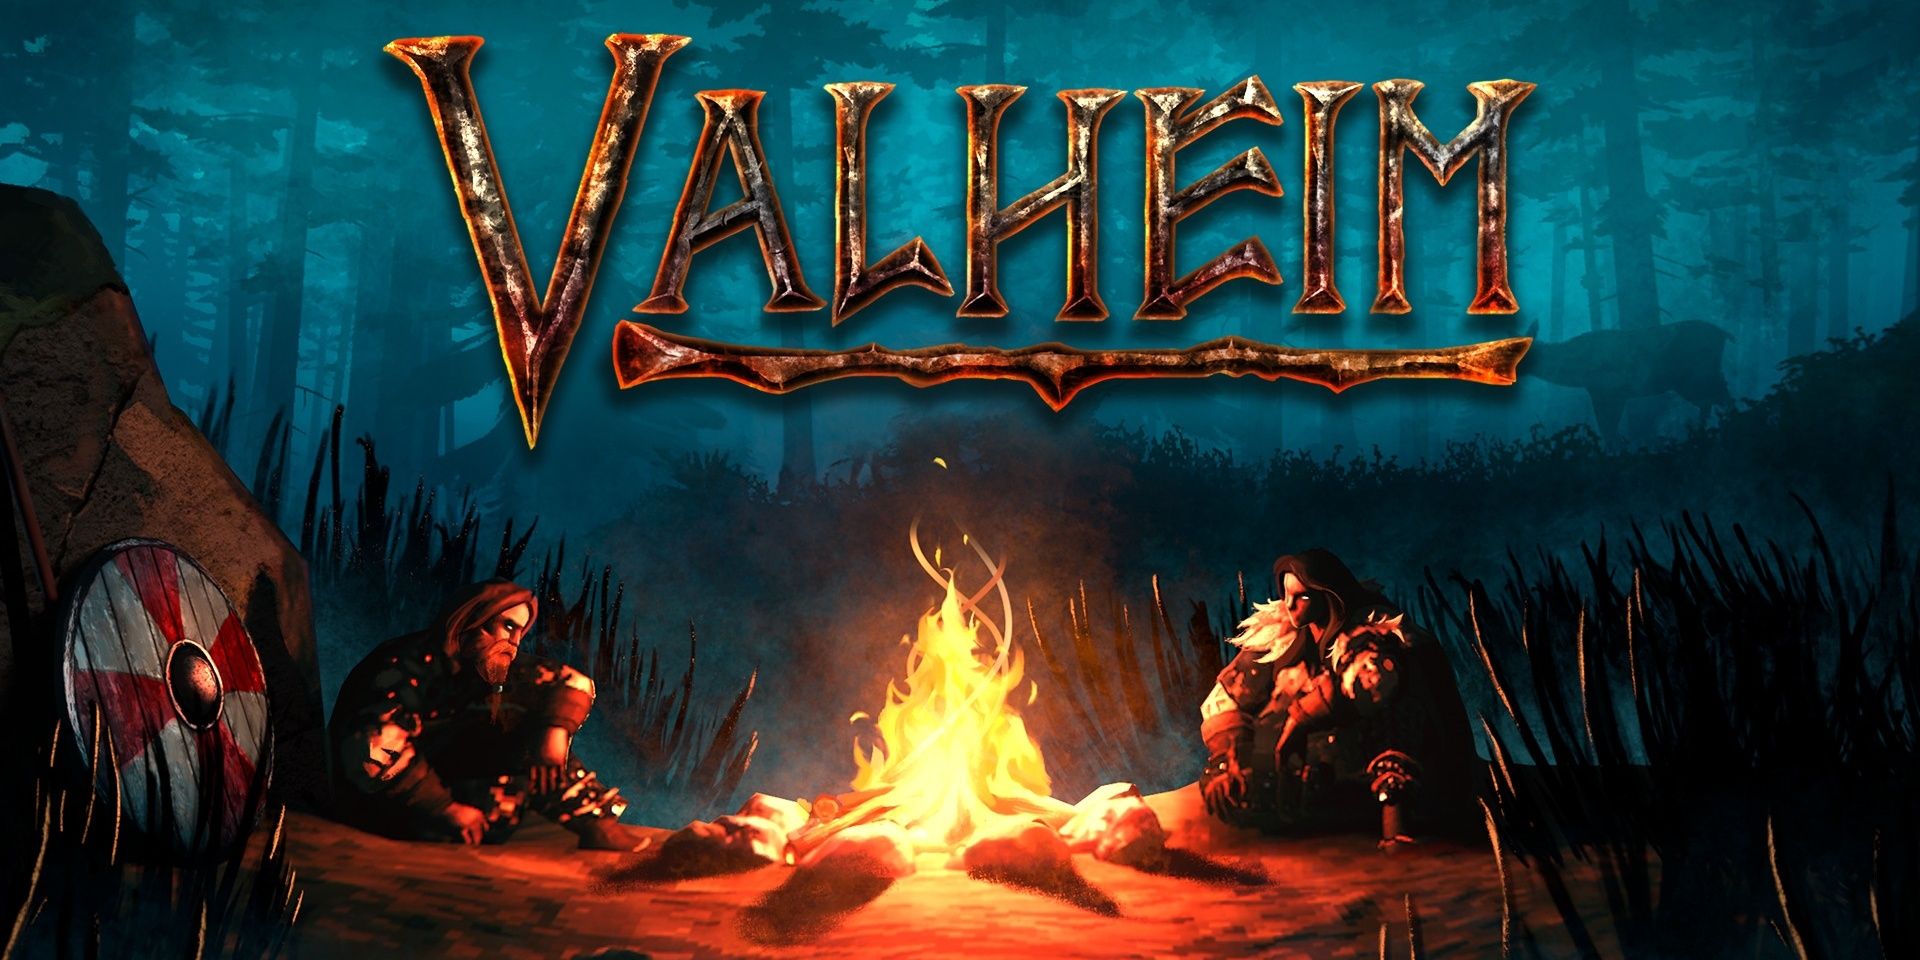 Two Valheim characters sitting by the fire